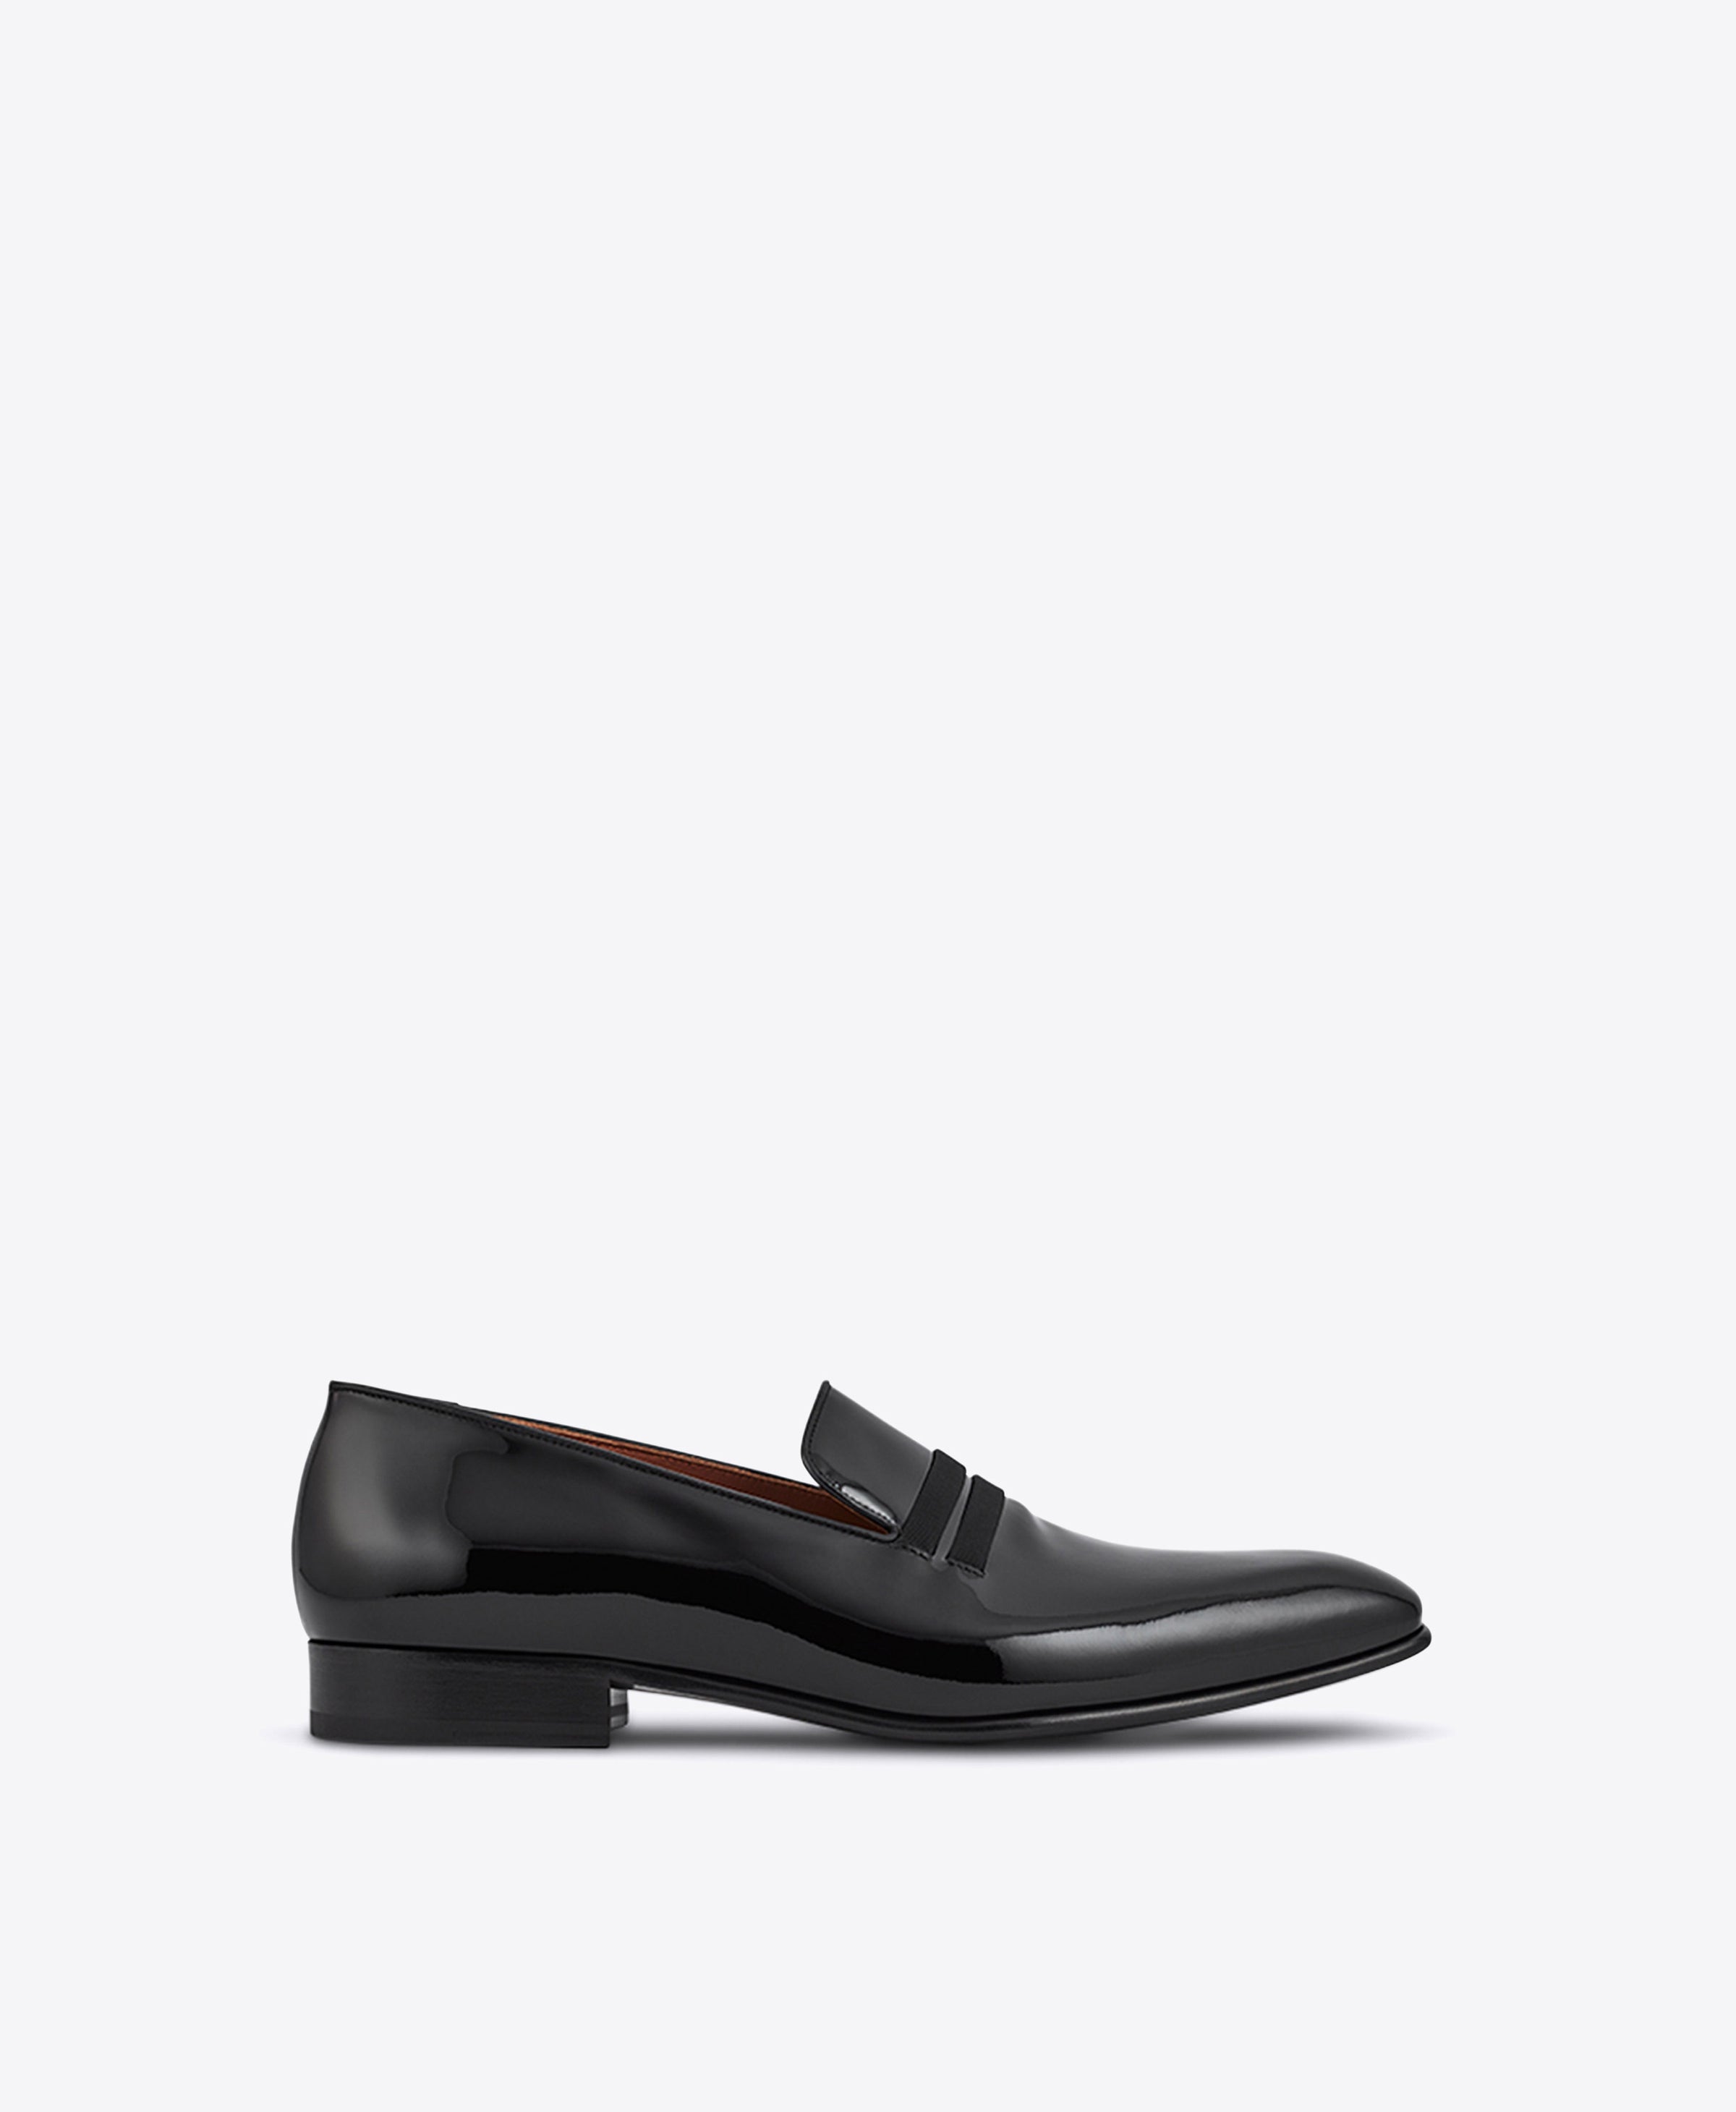 Miles Black Patent Leather Loafers | Malone Souliers